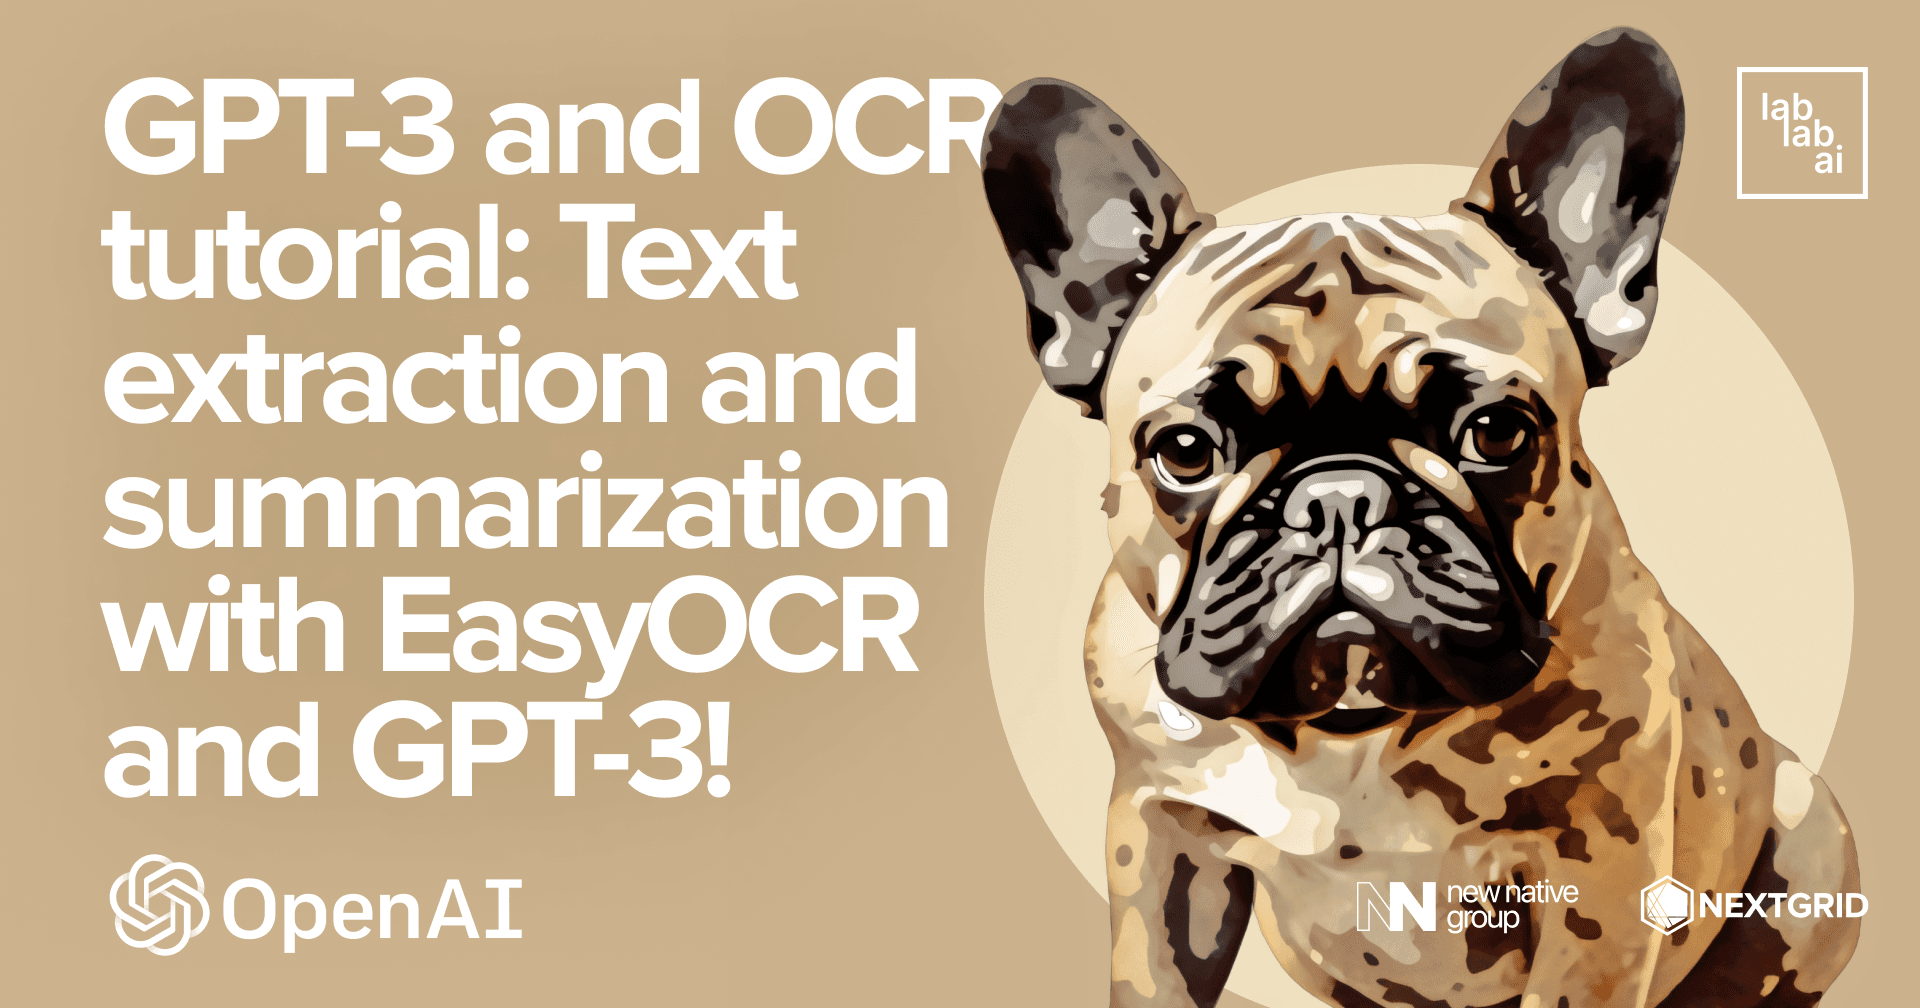 GPT-3 and OCR tutorial: Text extraction and summarization with EasyOCR and GPT-3!